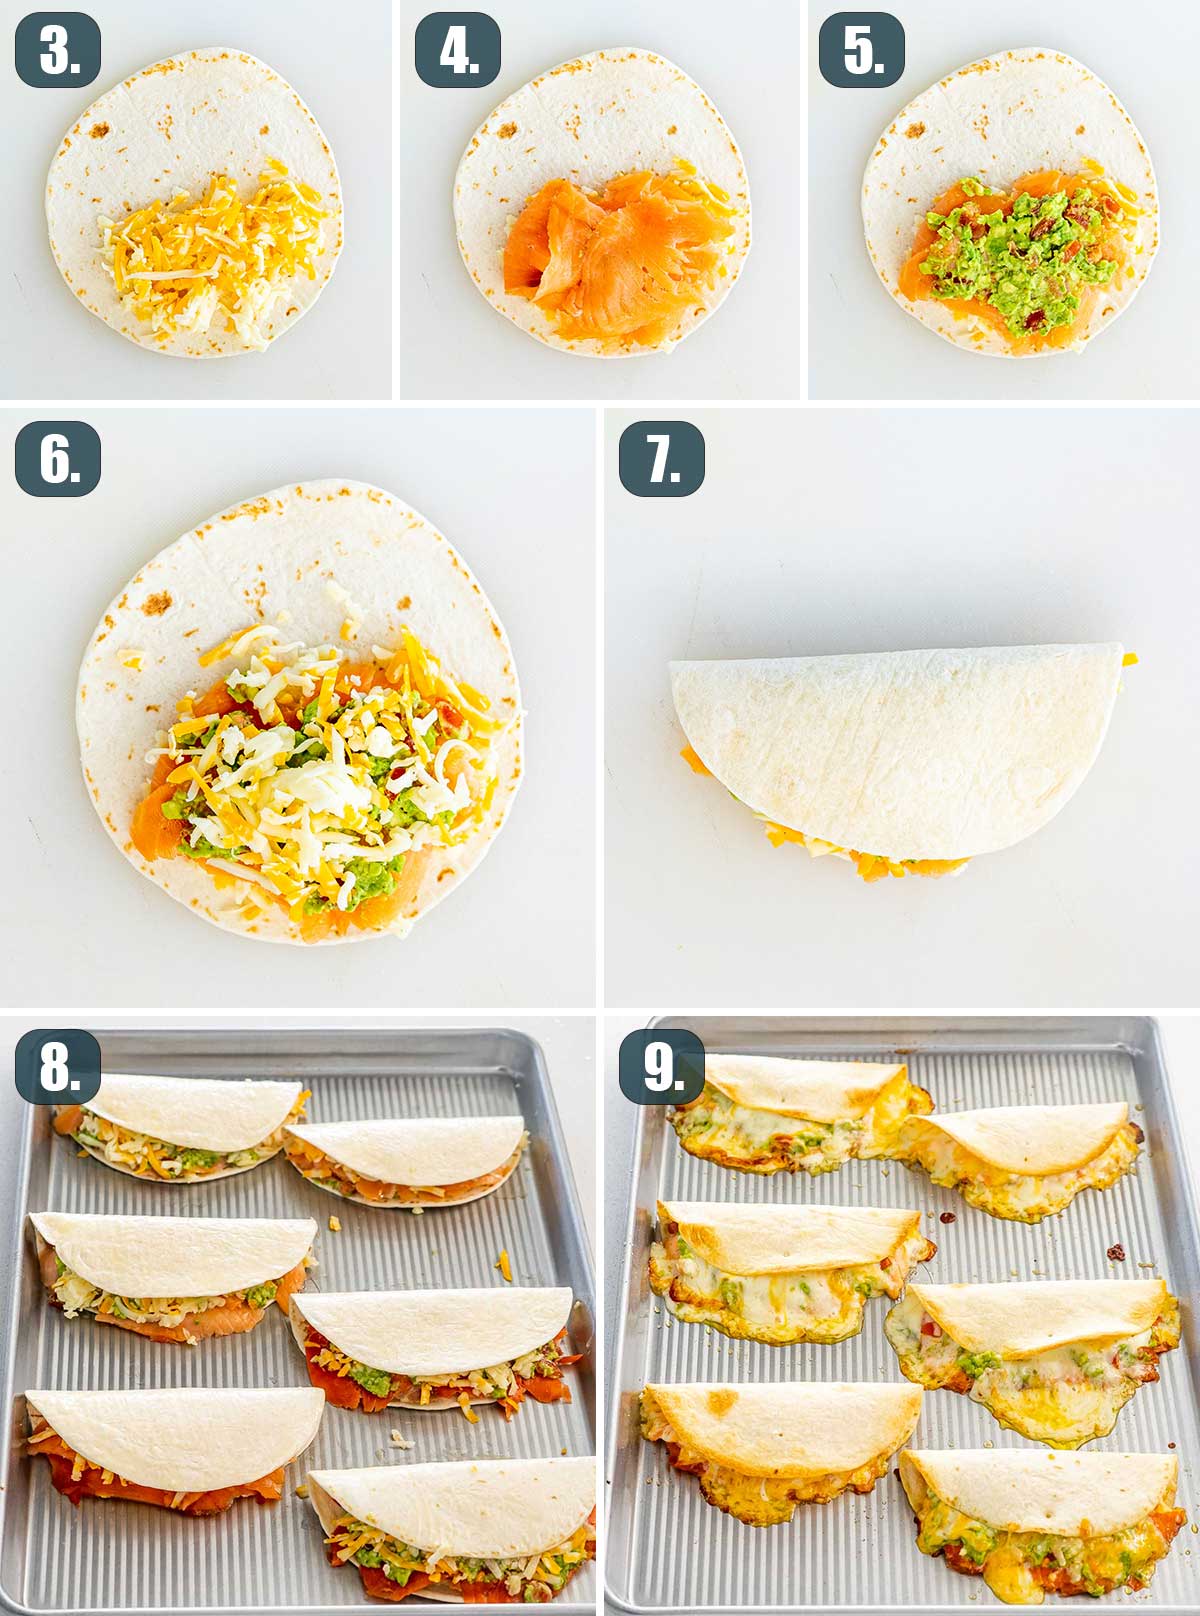 process shots showing how to make salmon quesadillas, baked in the oven.